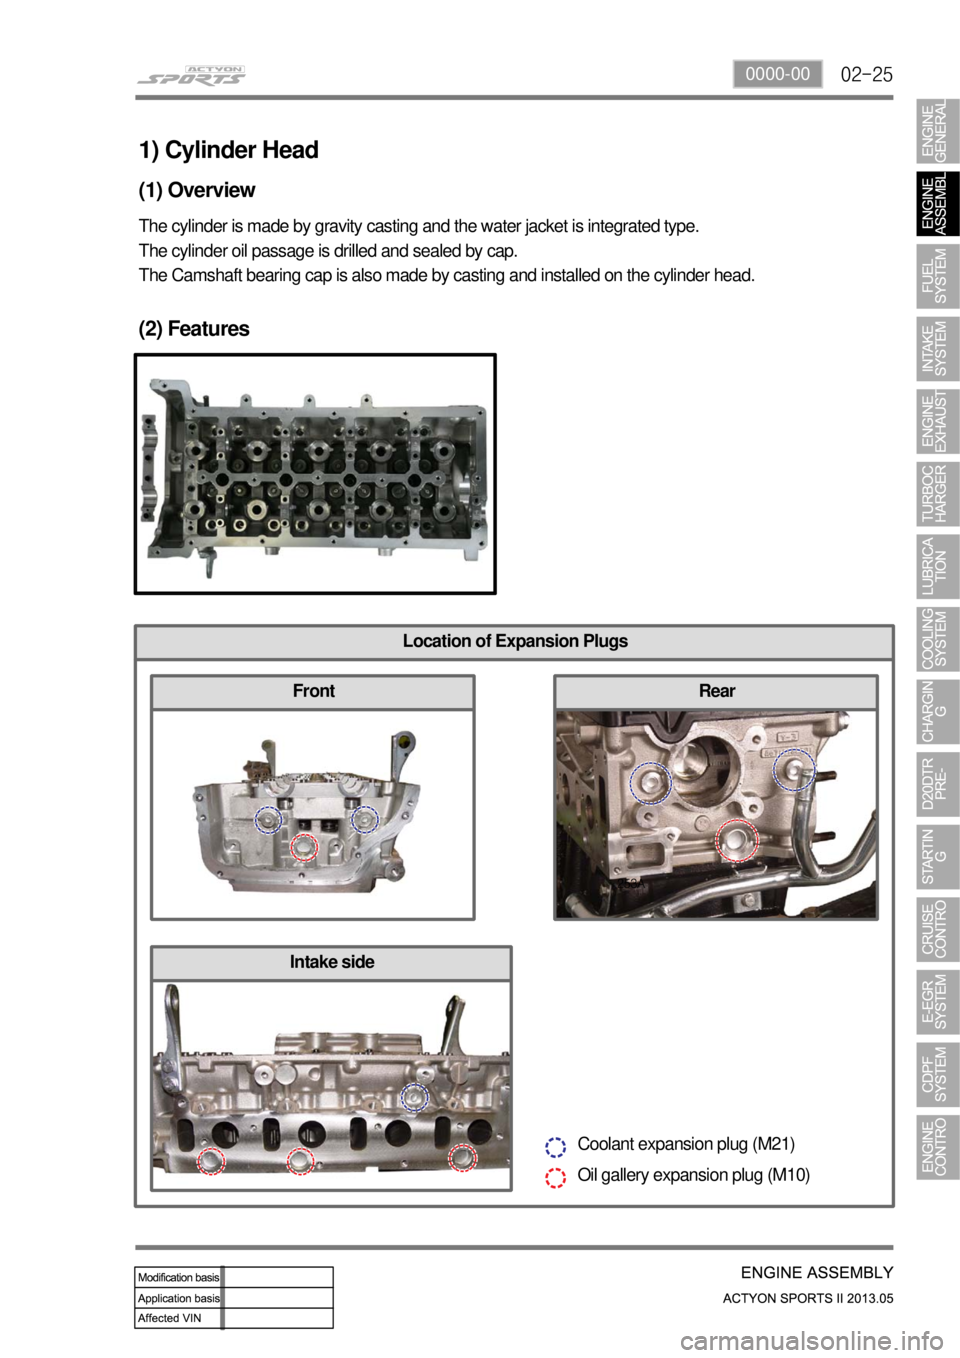 SSANGYONG NEW ACTYON SPORTS 2013  Service Manual 02-250000-00
Location of Expansion Plugs
1) Cylinder Head
(1) Overview
The cylinder is made by gravity casting and the water jacket is integrated type.
The cylinder oil passage is drilled and sealed b